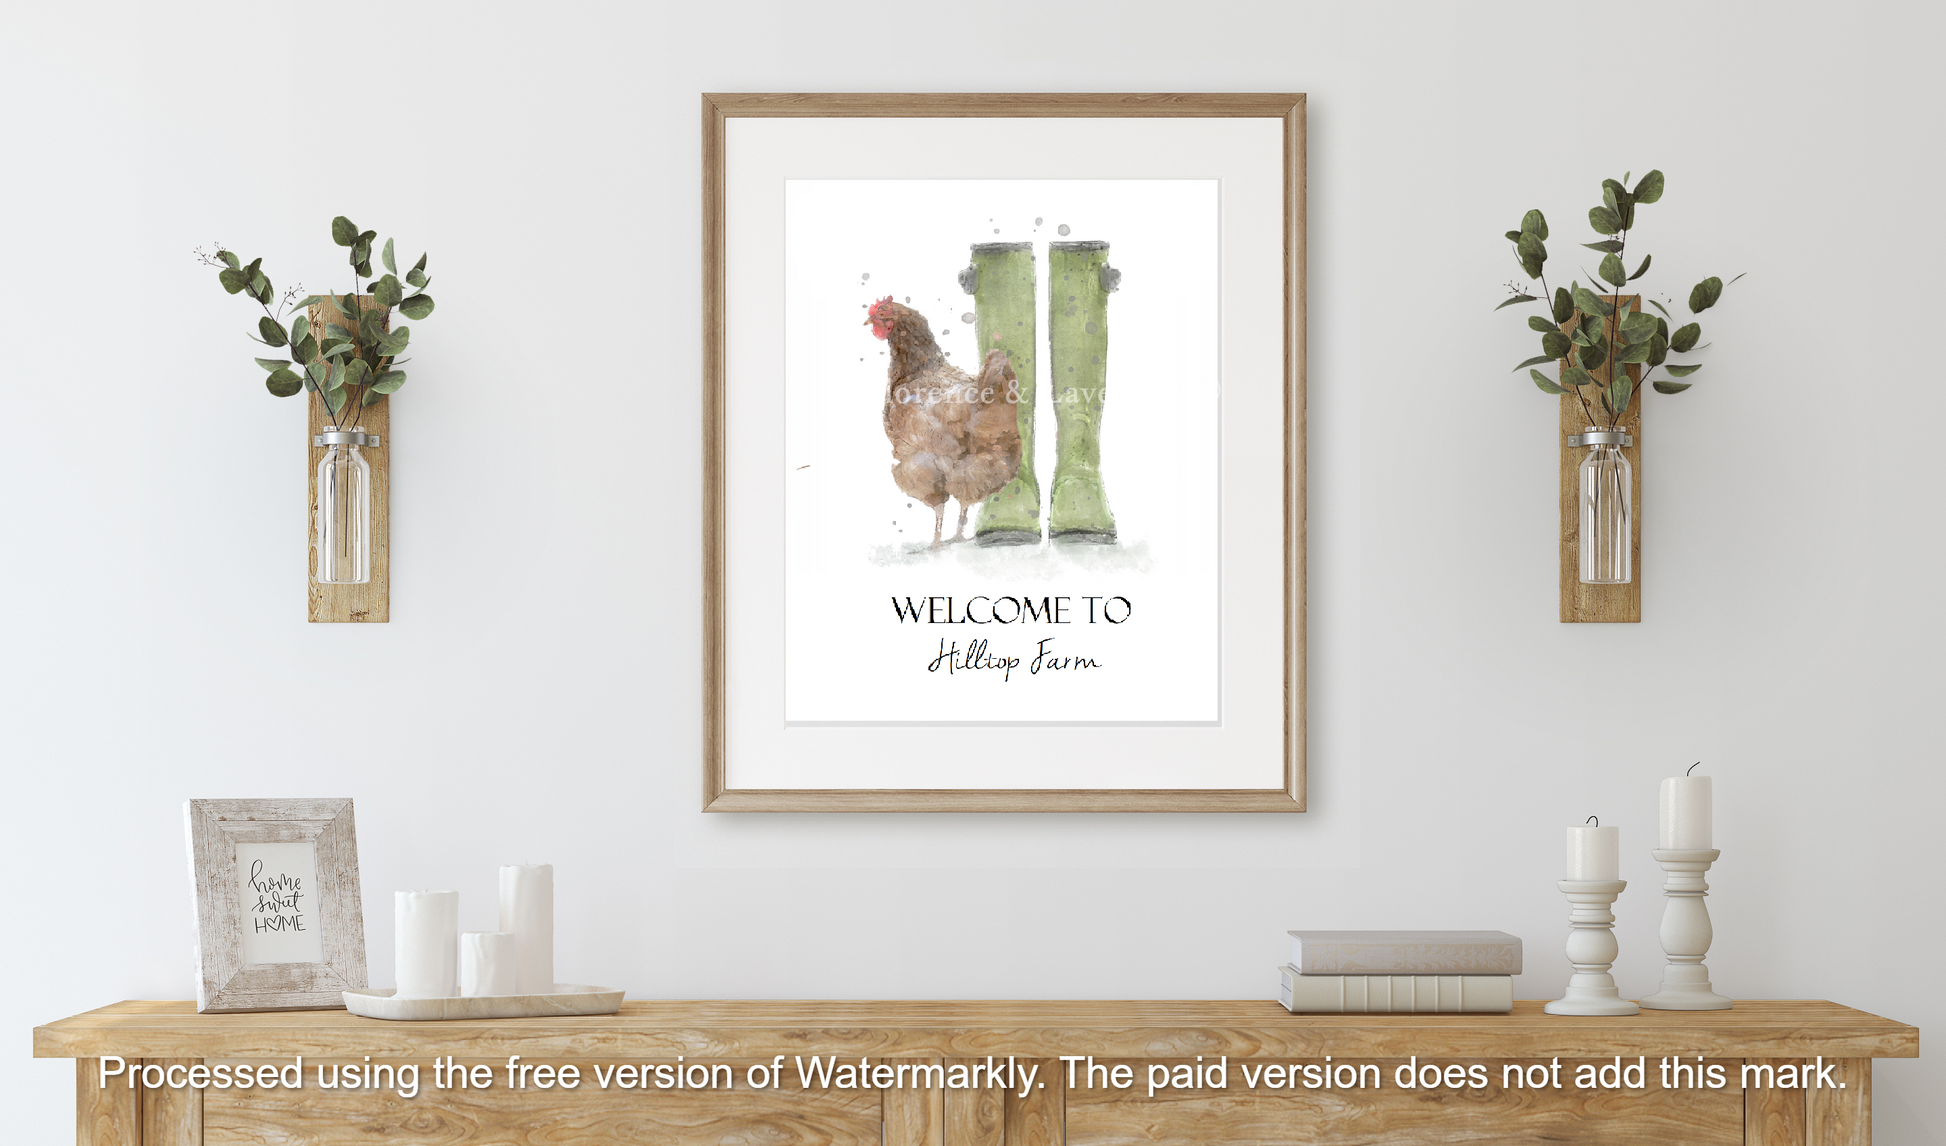 Personalised Welly Boot & Chicken Print - Florence & Lavender